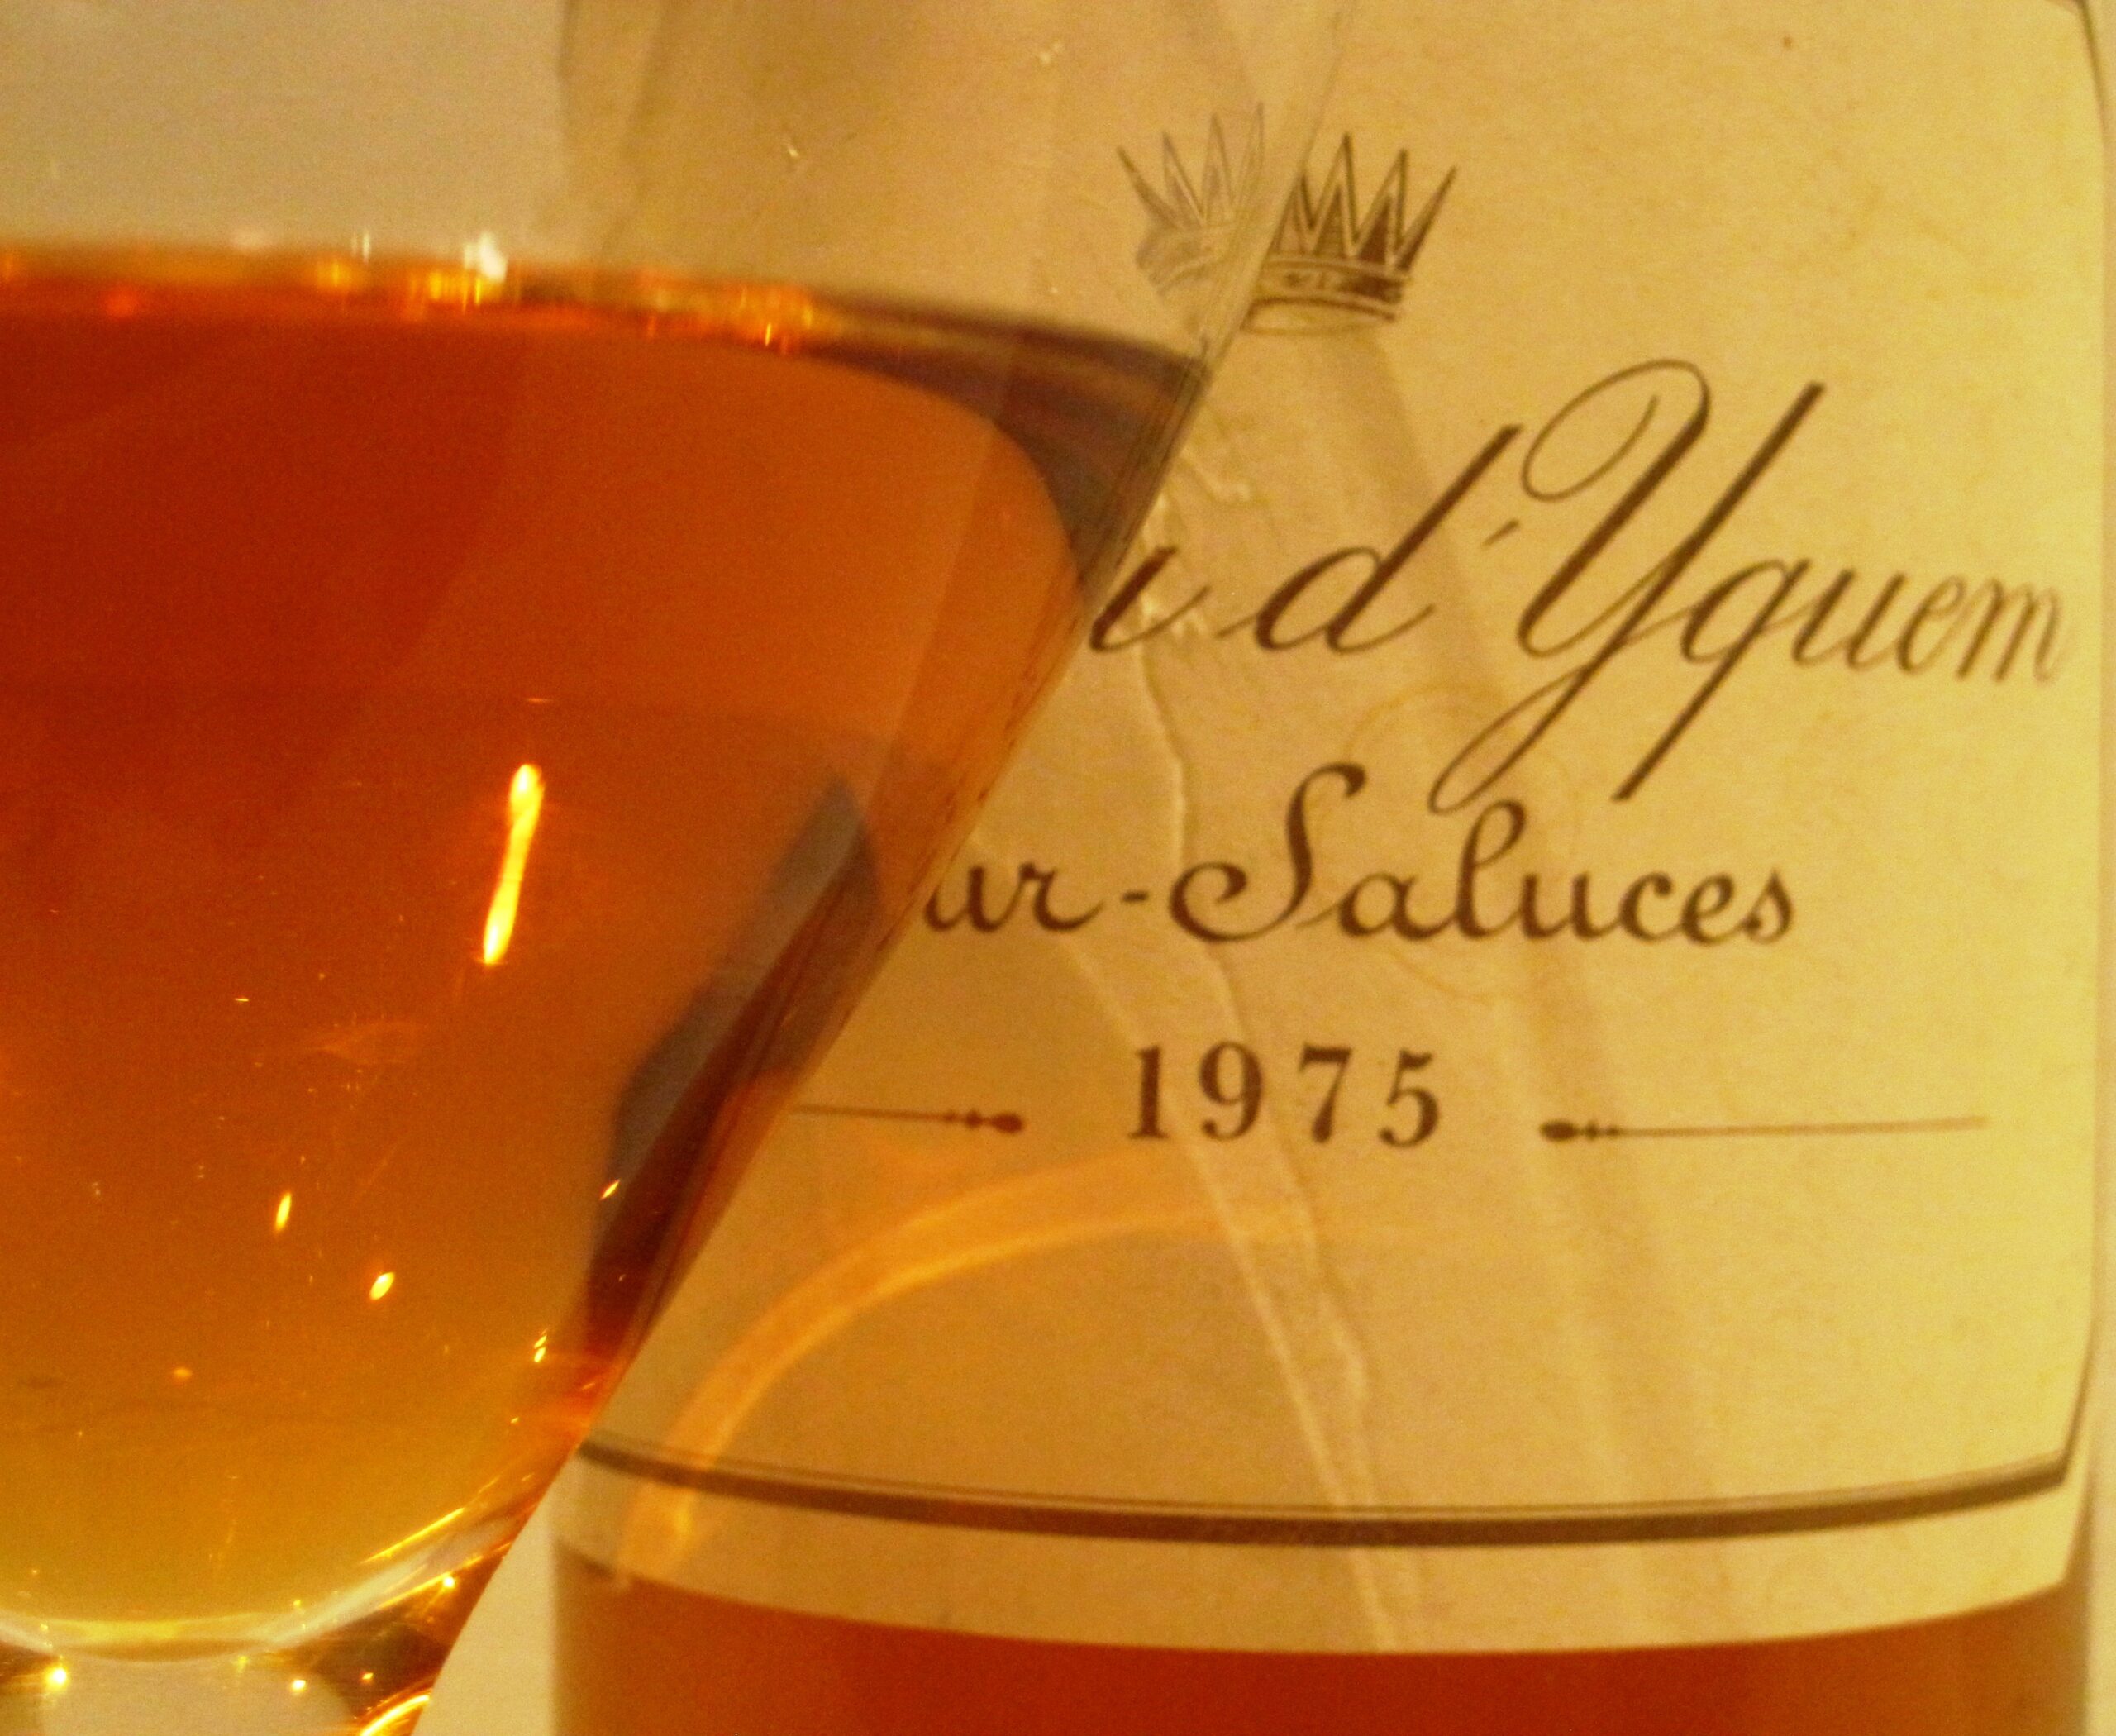 1975 Chateau d’Yquem Bordeaux wine, is heaven in a glass